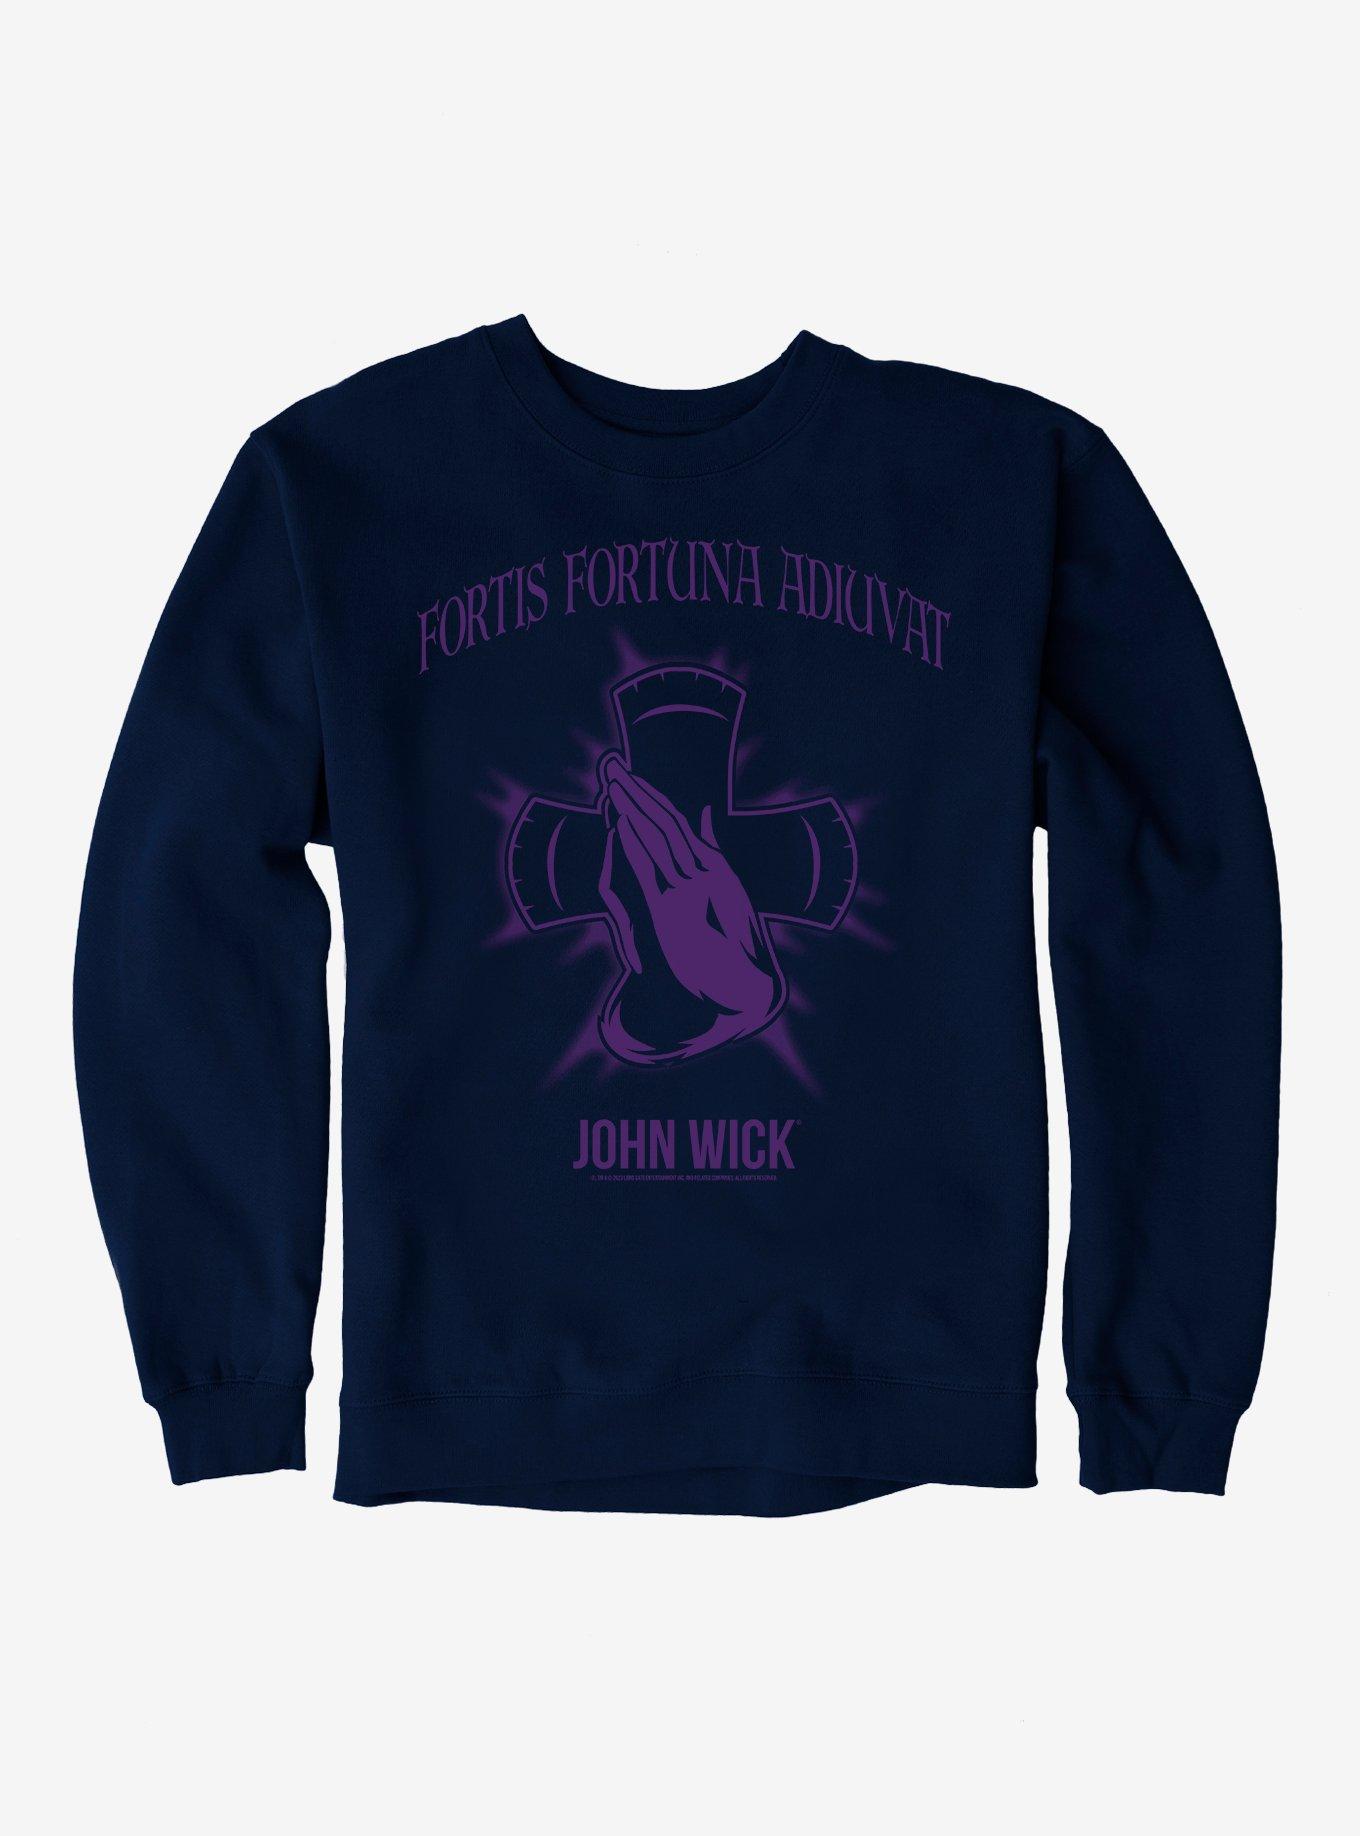 John Wick fortes fortuna juvat shirt, hoodie, sweater, long sleeve and tank  top